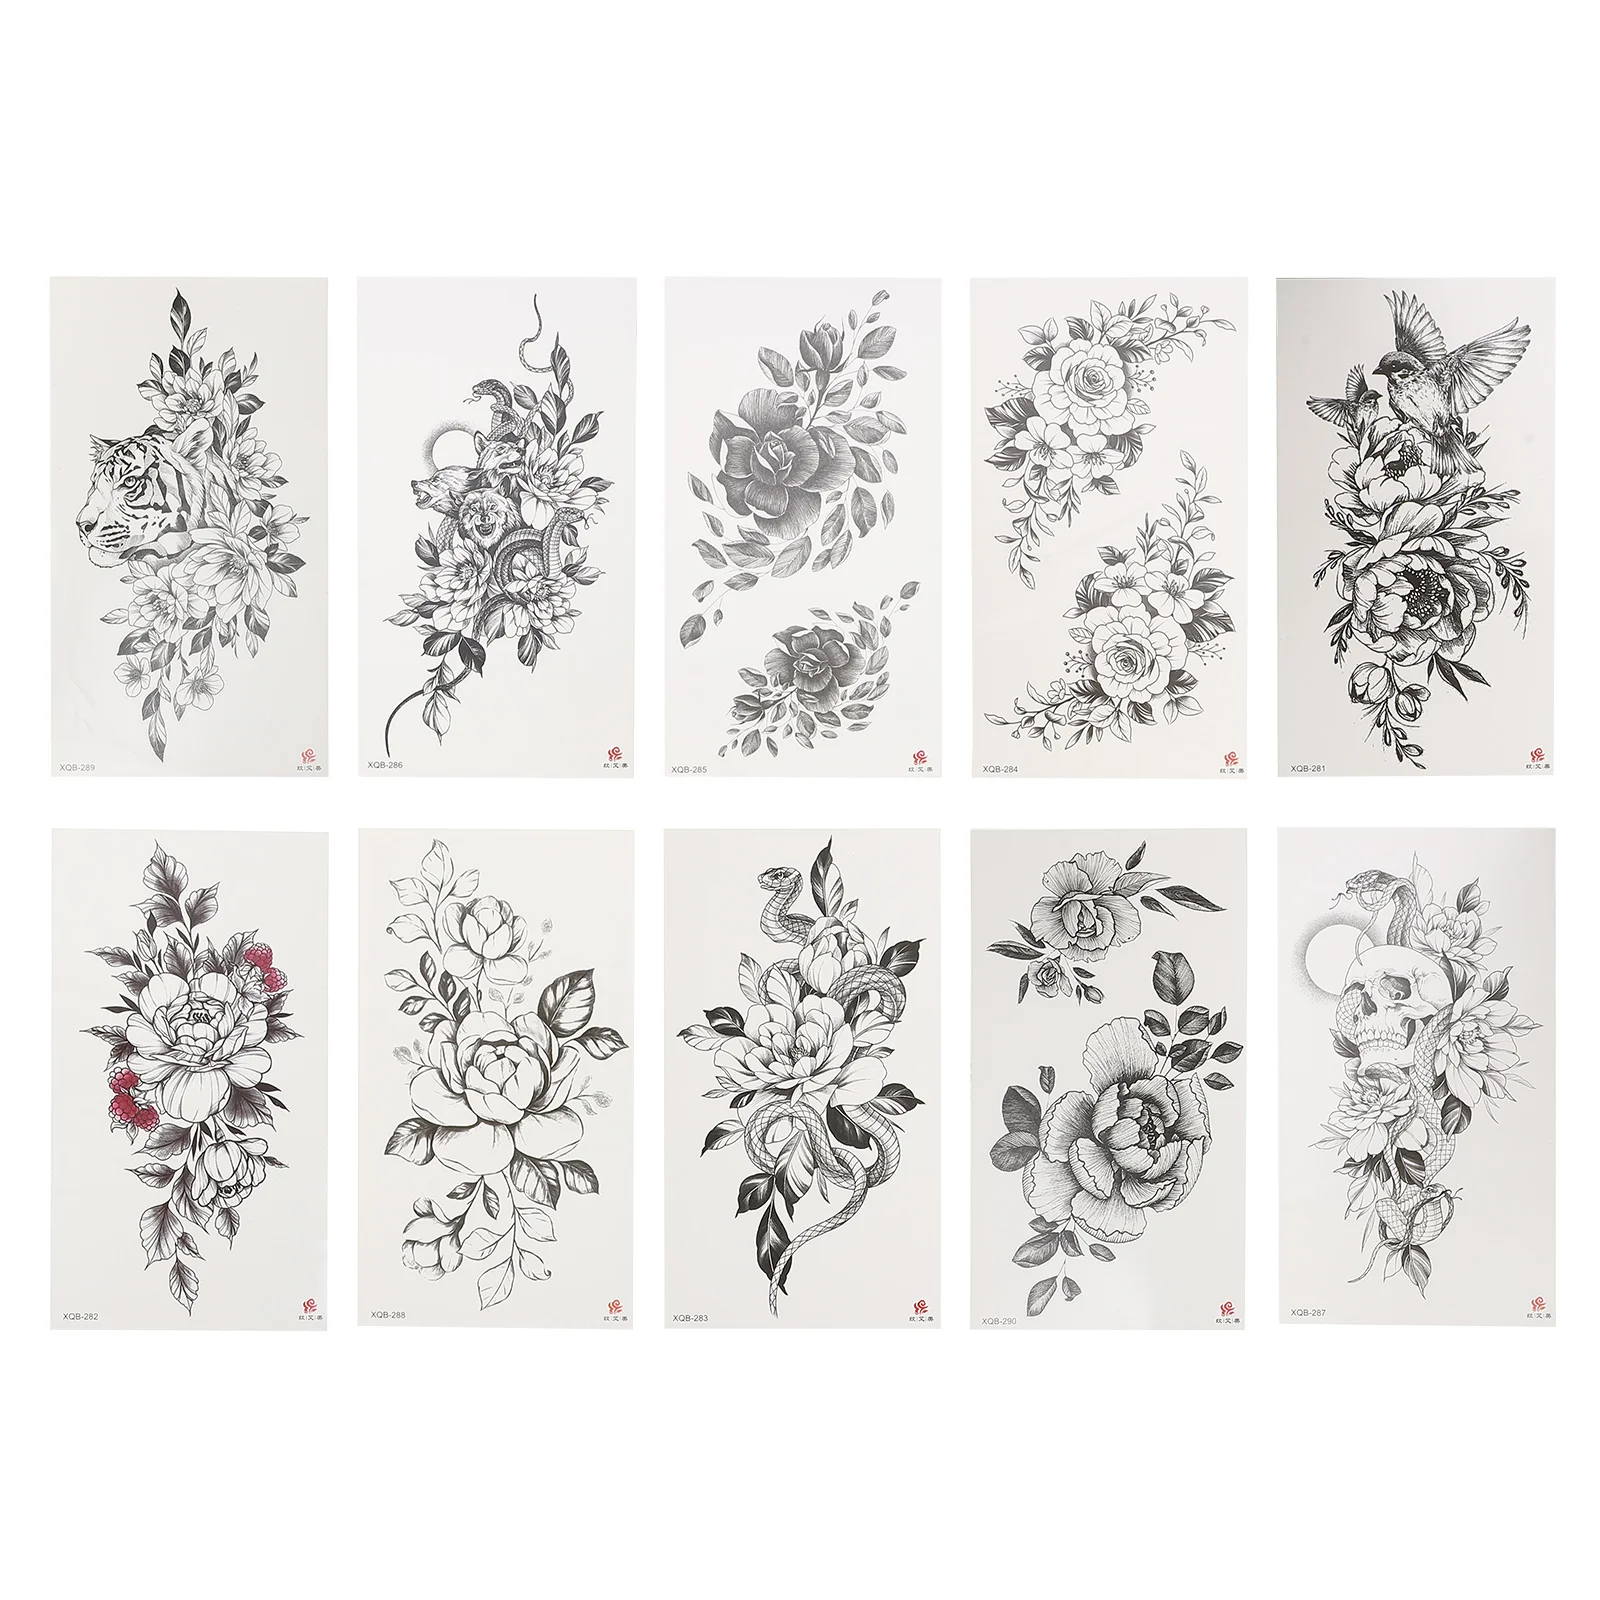 

10 Sheets Waterproof Stickers Adult Arm Tattoo Tattoos Decal Temporary Fake Peony Body Transfer